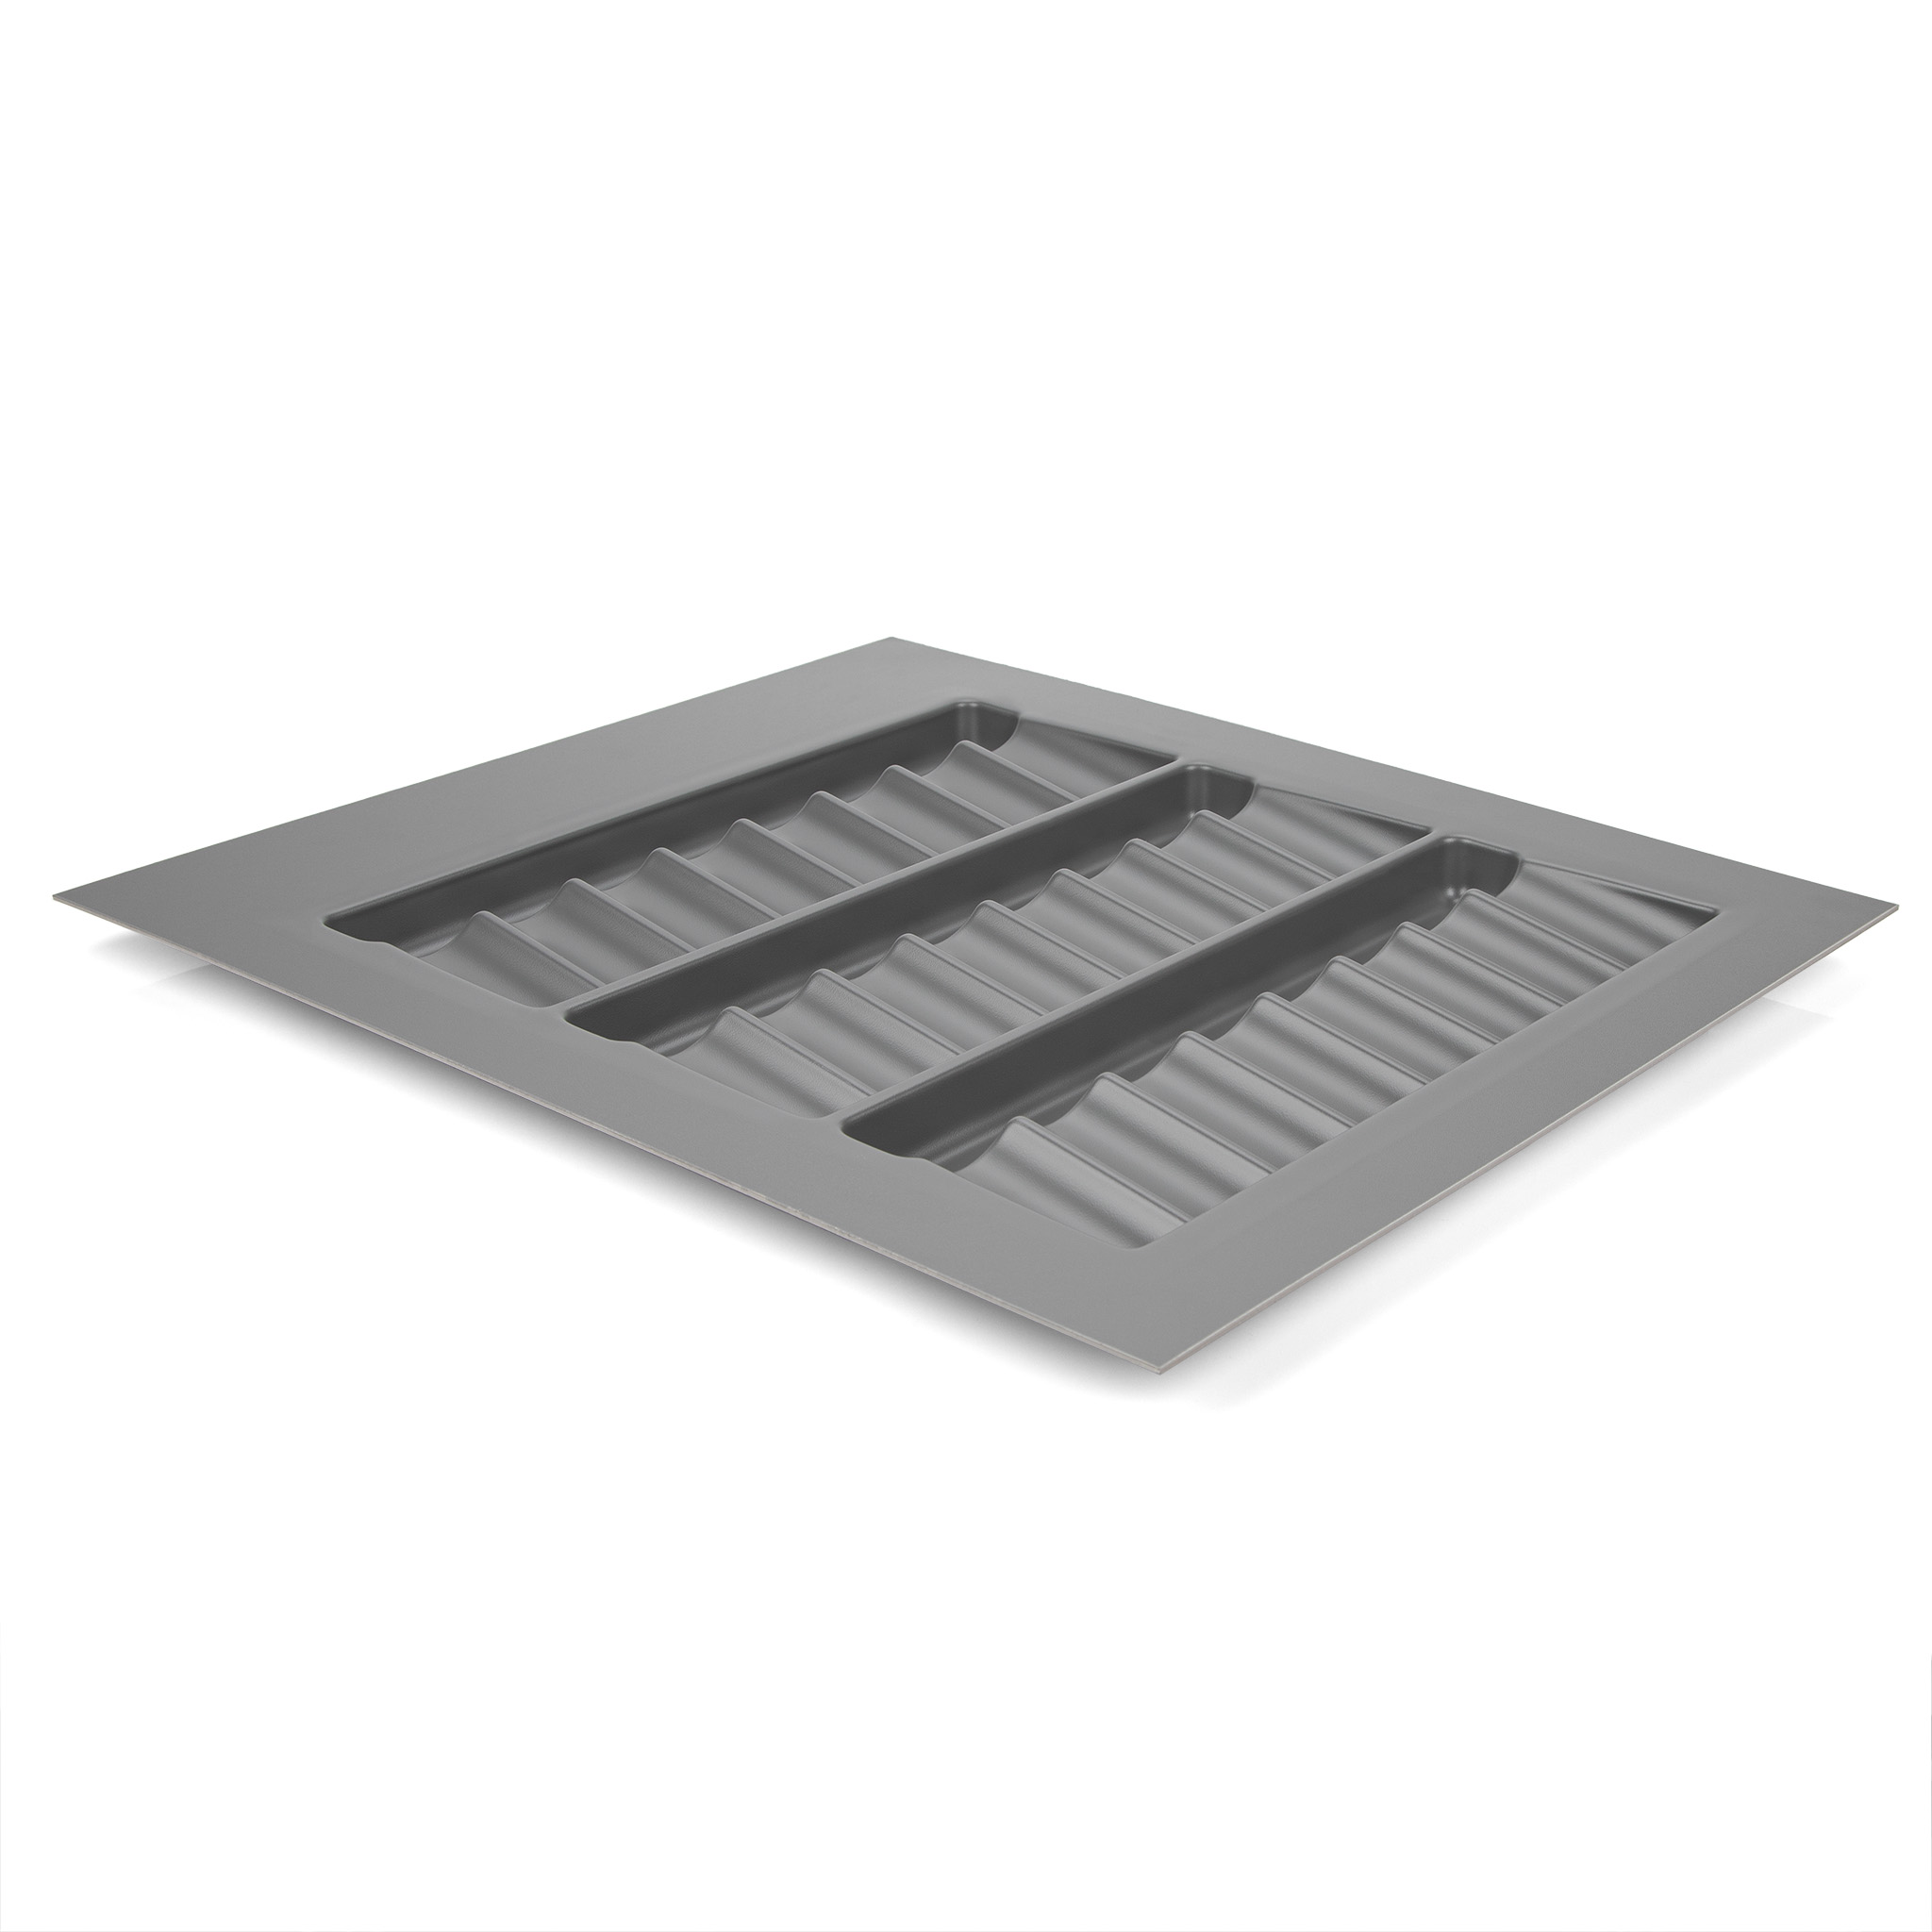 Area Spice Tray Organizers, 390mm - 480mm Grey Matte